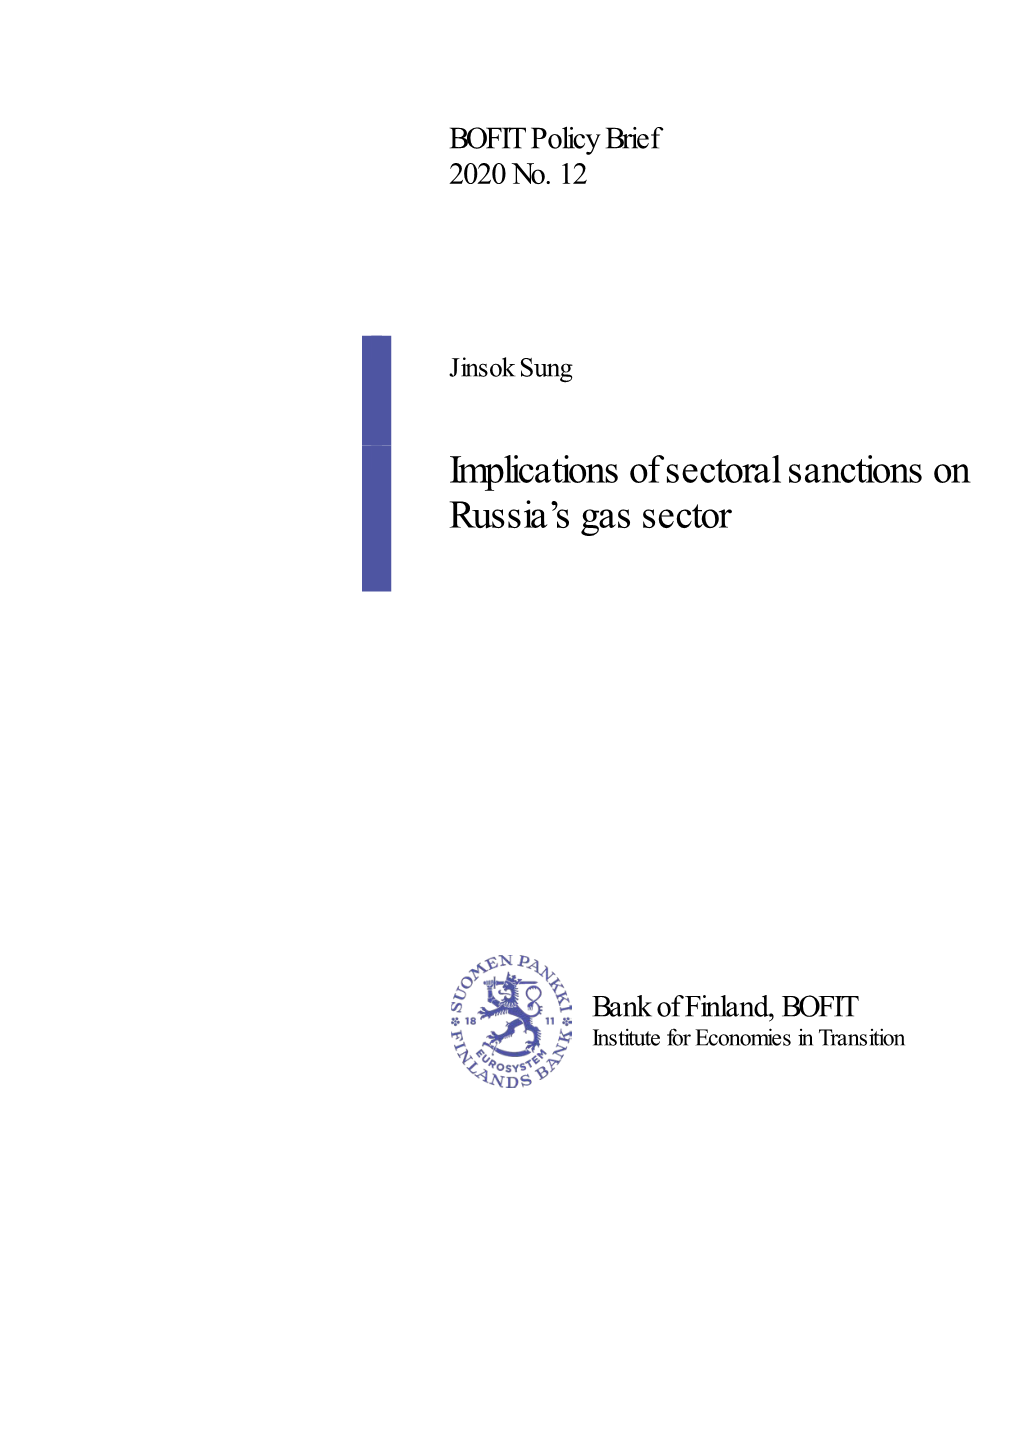 Implications of Sectoral Sanctions on Russia's Gas Sector